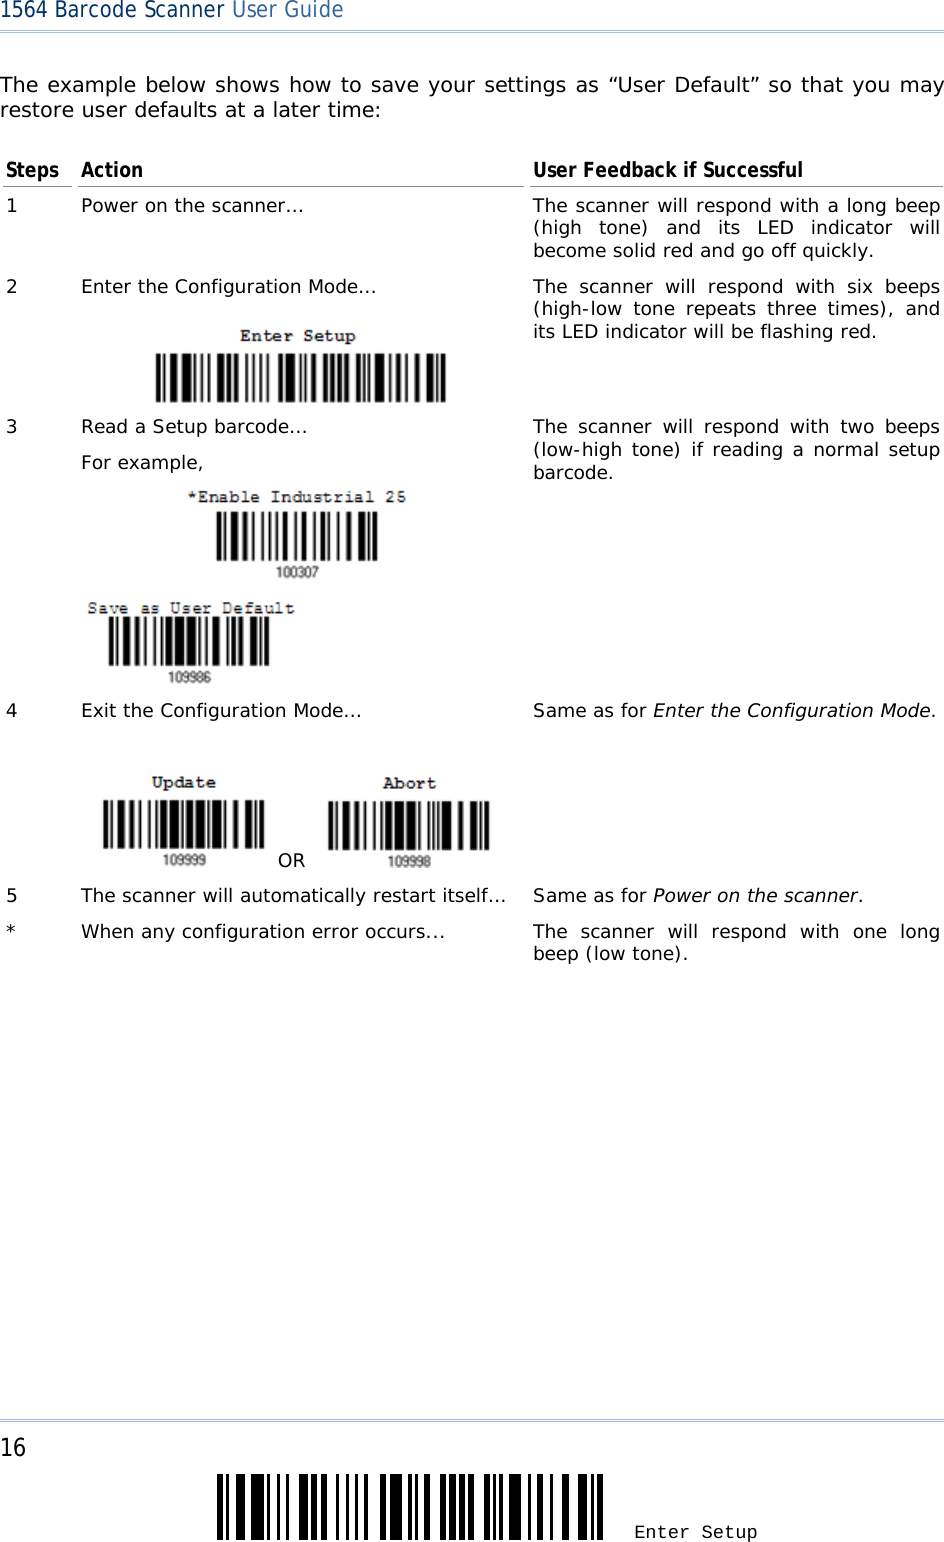 16 Enter Setup 1564 Barcode Scanner User Guide  The example below shows how to save your settings as “User Default” so that you may restore user defaults at a later time: Steps  Action  User Feedback if Successful 1  Power on the scanner…  The scanner will respond with a long beep (high tone) and its LED indicator will become solid red and go off quickly. 2  Enter the Configuration Mode…  The scanner will respond with six beeps (high-low tone repeats three times), and its LED indicator will be flashing red.  3  Read a Setup barcode… For example,               The scanner will respond with two beeps (low-high tone) if reading a normal setup barcode. 4  Exit the Configuration Mode…      OR    Same as for Enter the Configuration Mode. 5  The scanner will automatically restart itself…  Same as for Power on the scanner. *  When any configuration error occurs...  The scanner will respond with one long beep (low tone).   